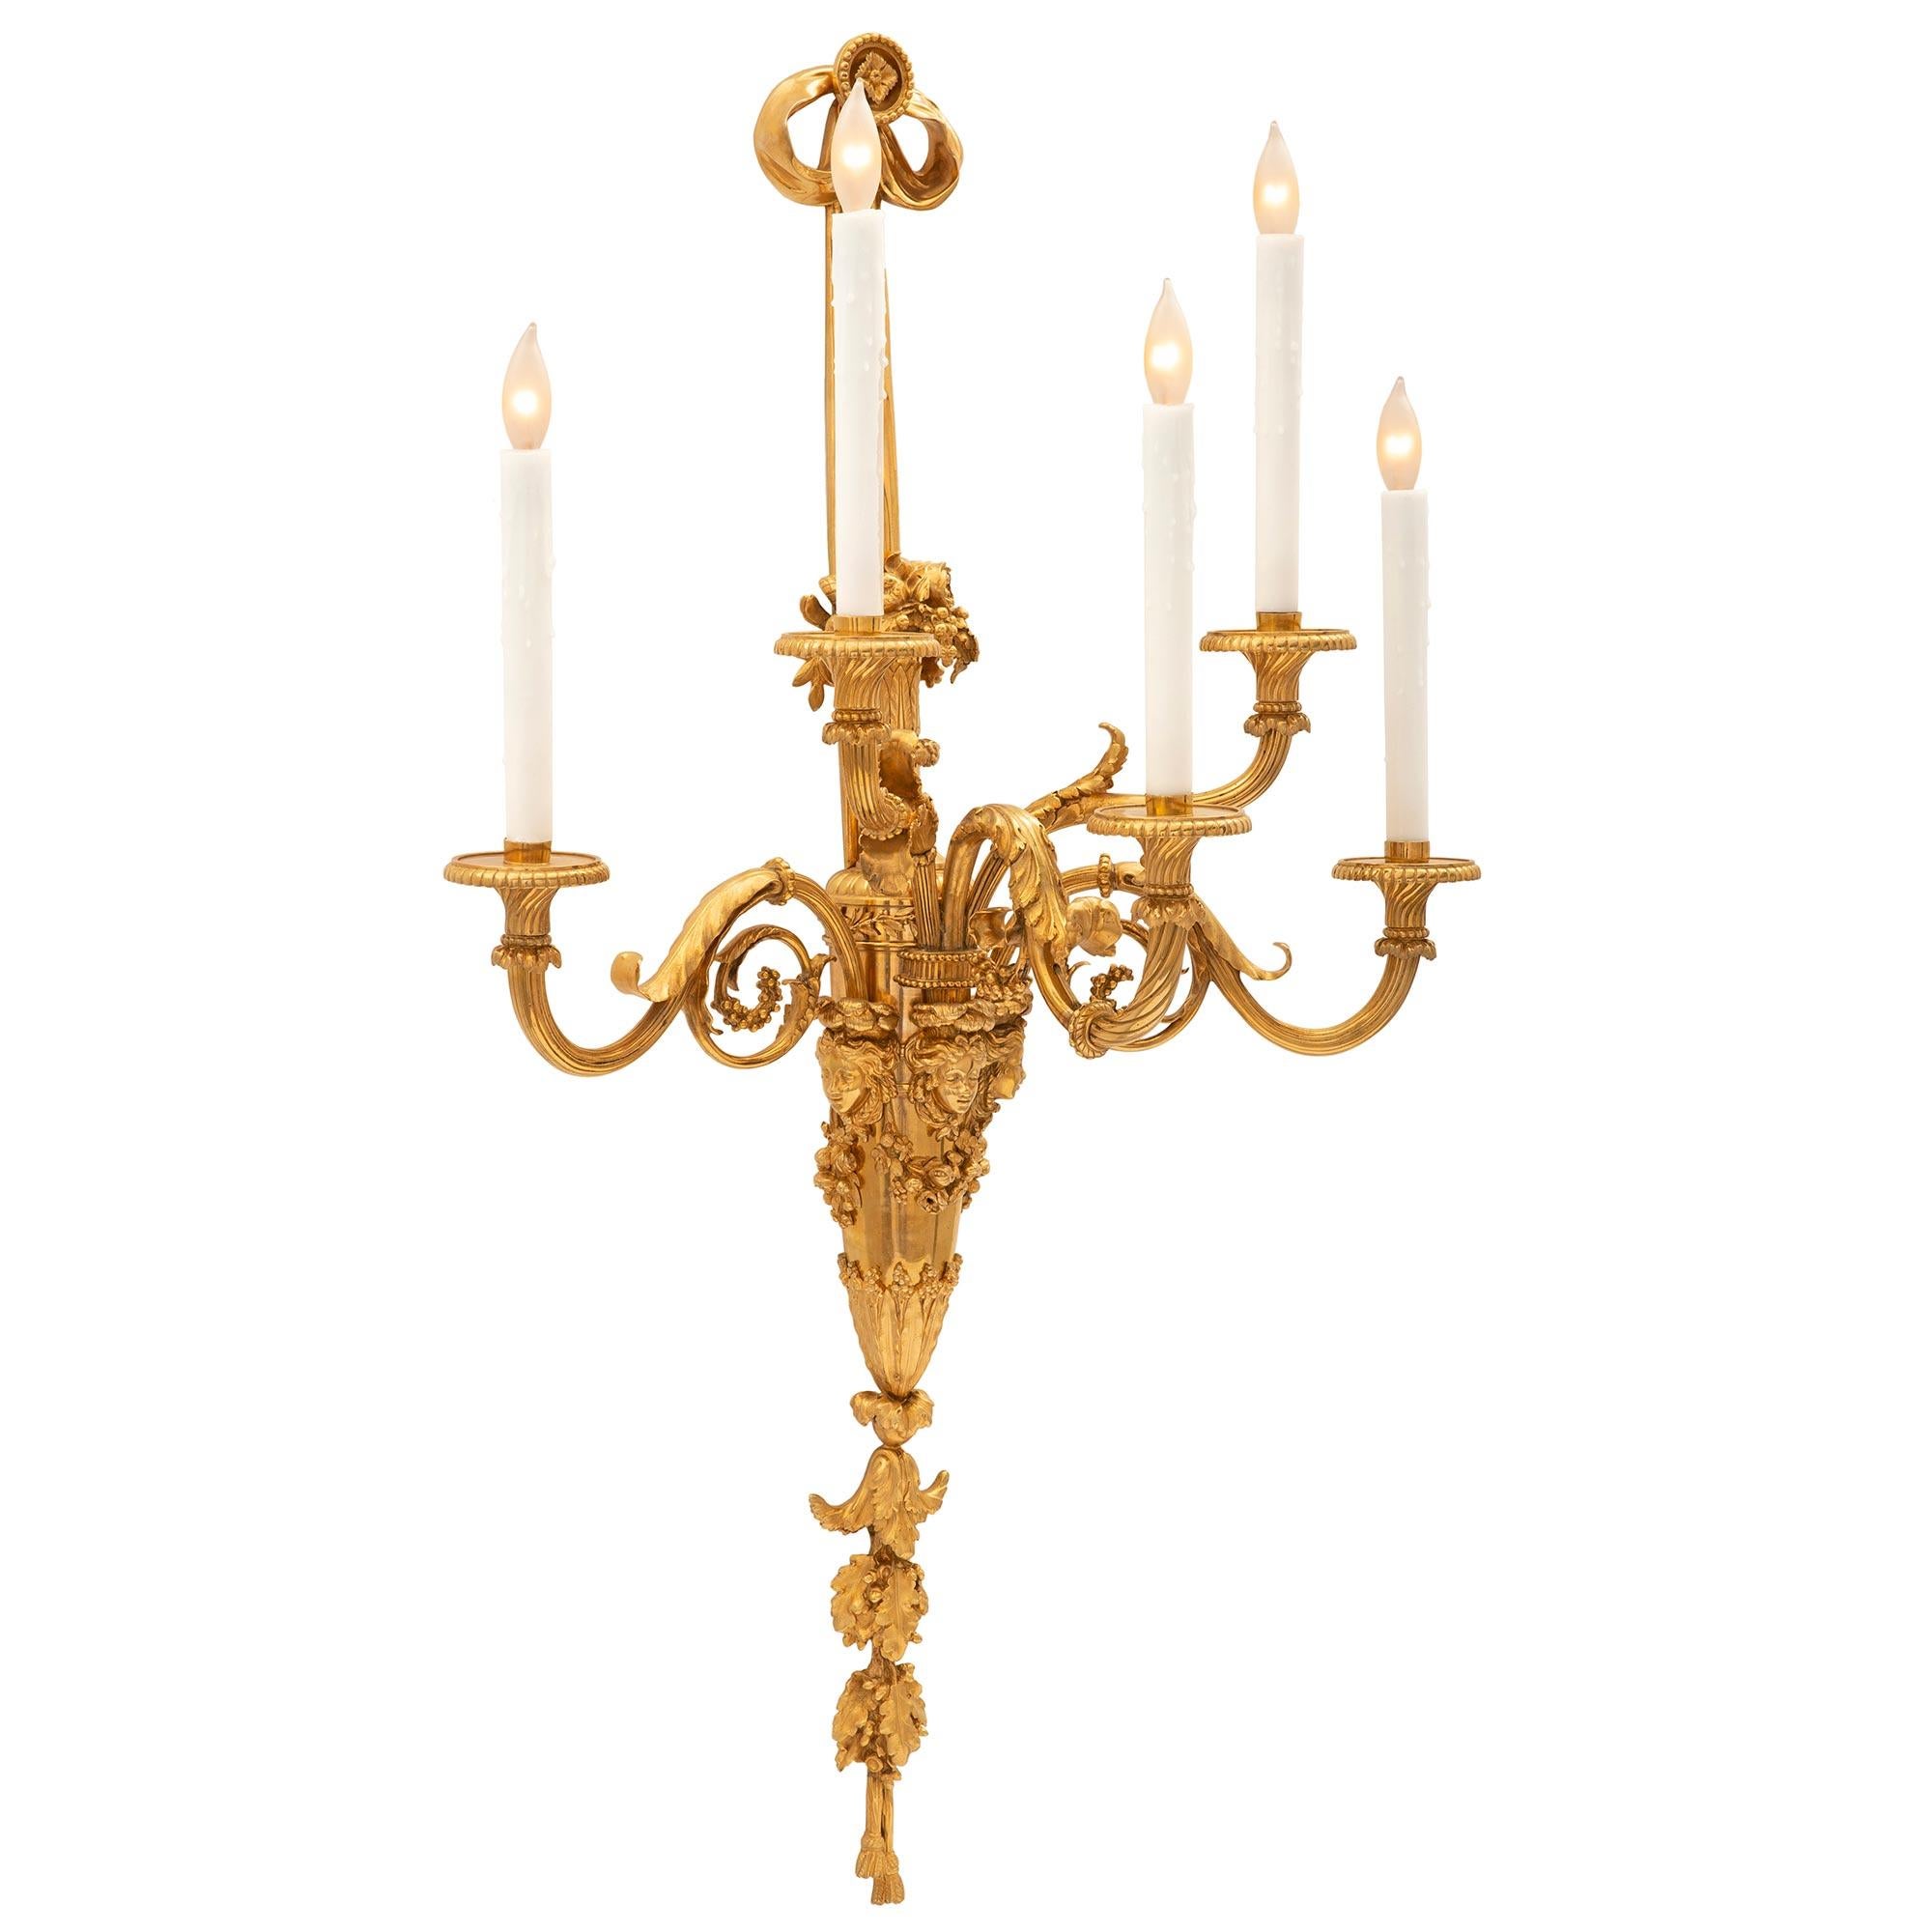 A monumental pair of French mid 19th century Louis XVI st. ormolu sconces. Each magnificent sconce has a ribbon style bow backplate accented with a rosette at the top and a cornucopia of berried flowers at the bottom. From the impressive fut extend